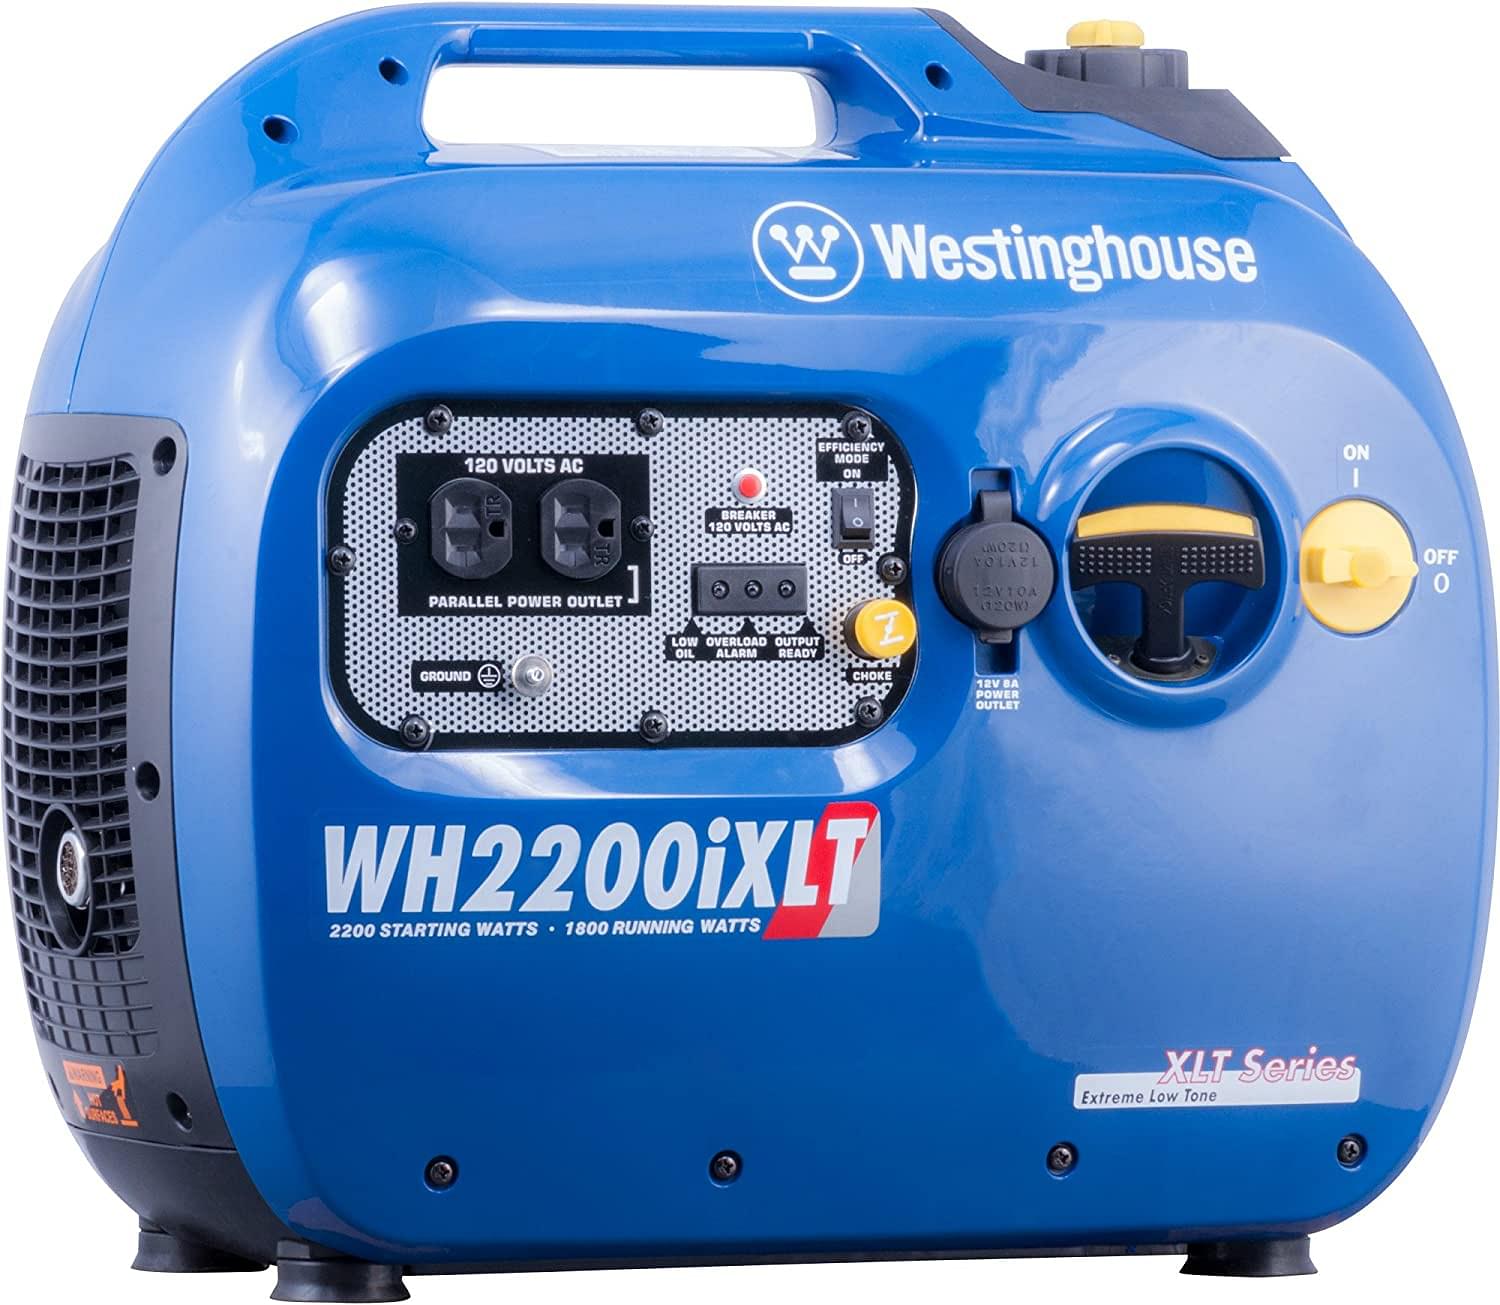 Safety Features Of A Westinghouse 2200 Generator